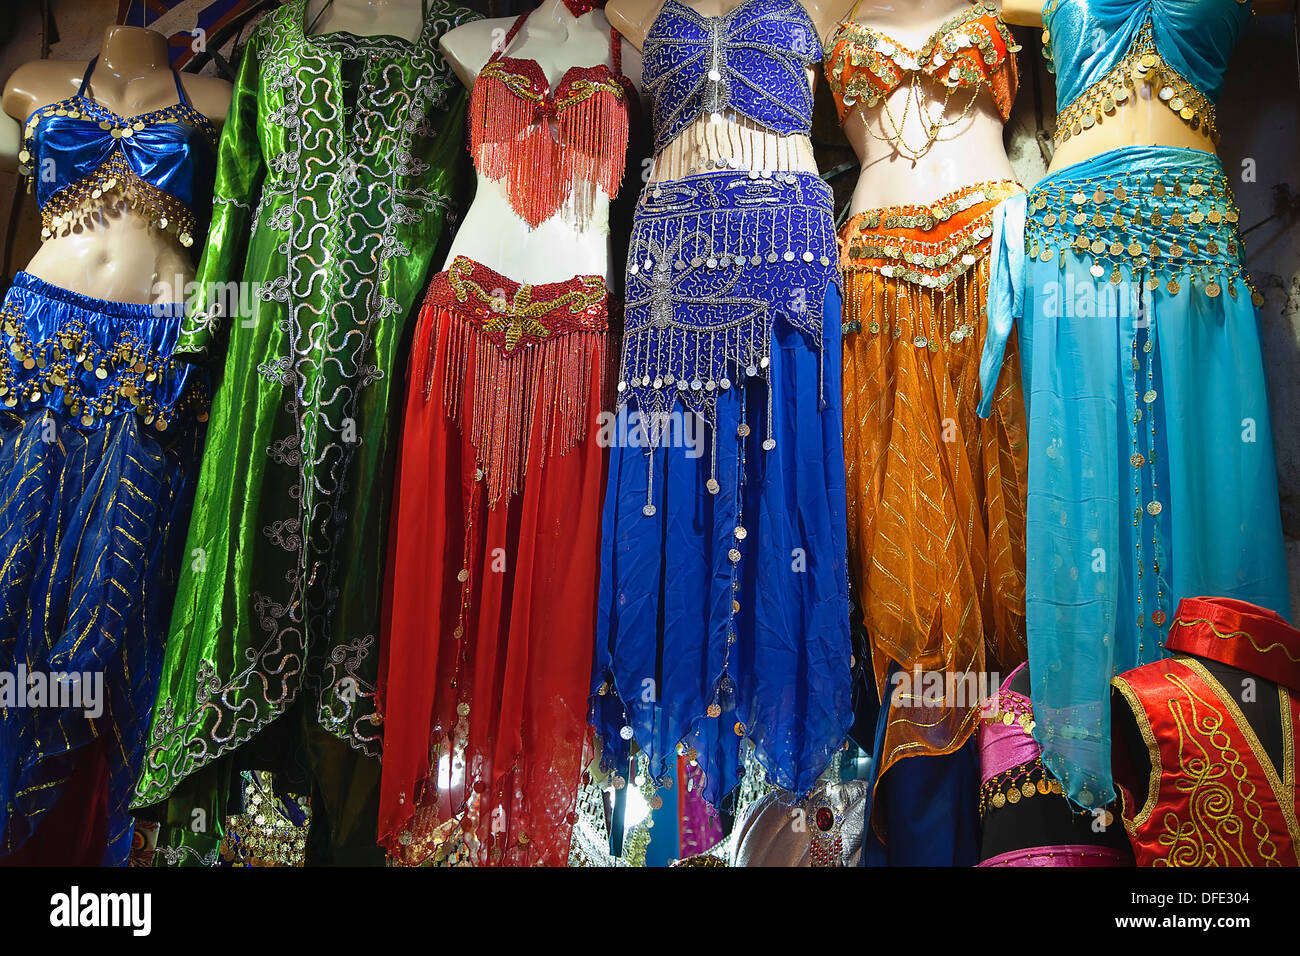 Turkey, Istanbul, Fatih, Sultanahmet, Kapalicarsi, Stall selling  traditional clothing in the Grand Bazaar Stock Photo - Alamy